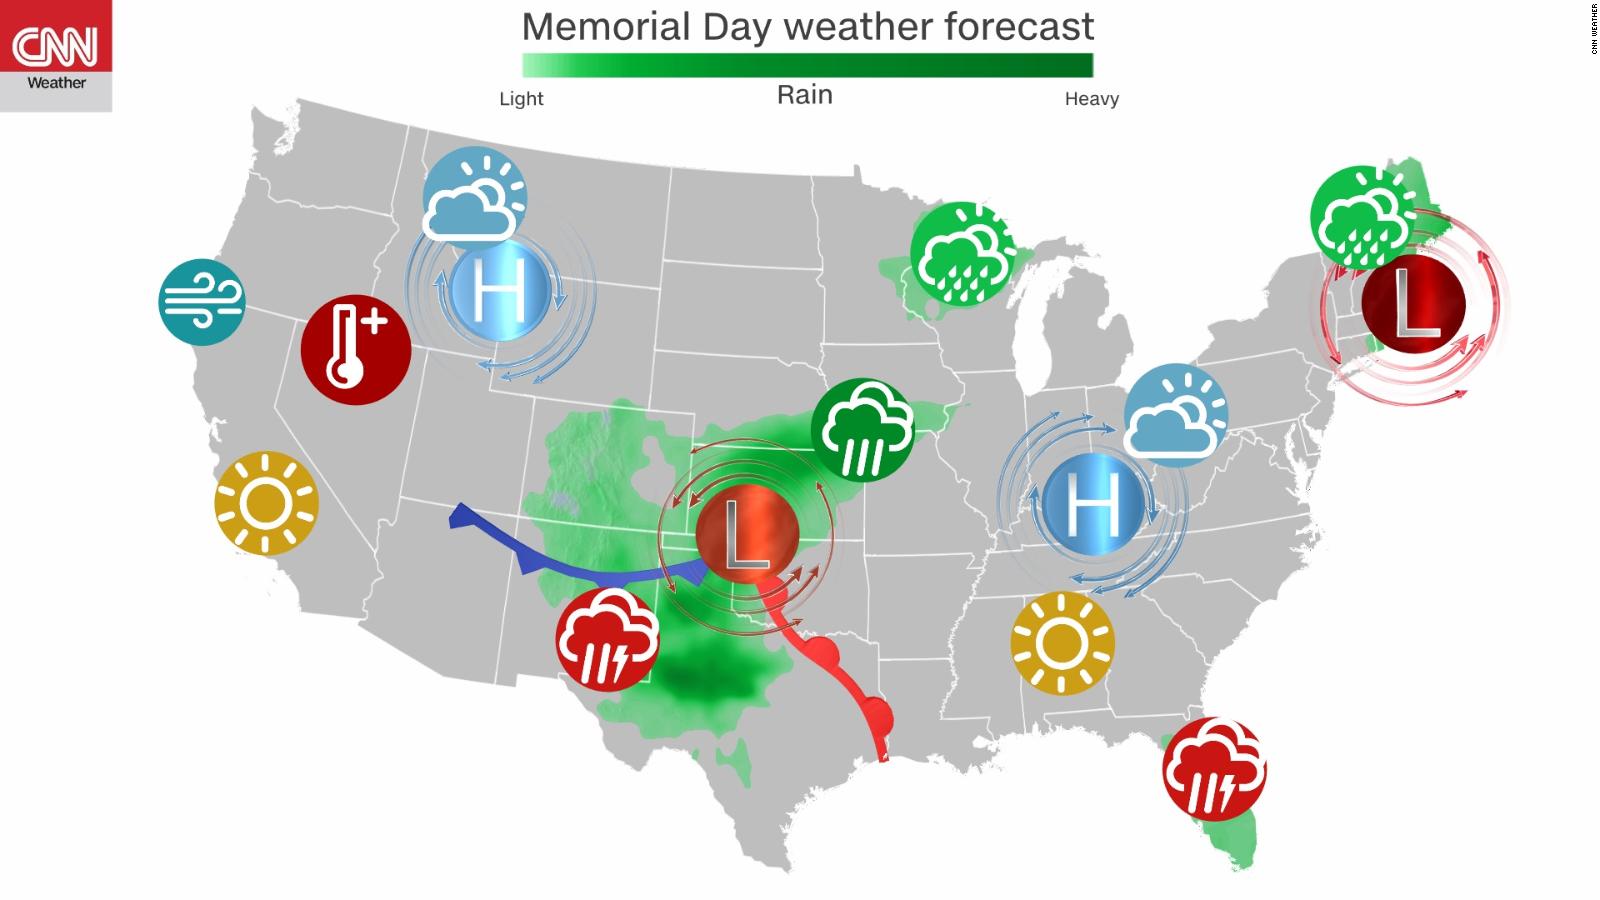 Memorial Day weekend brings record cold, tripledigit heat and stormy